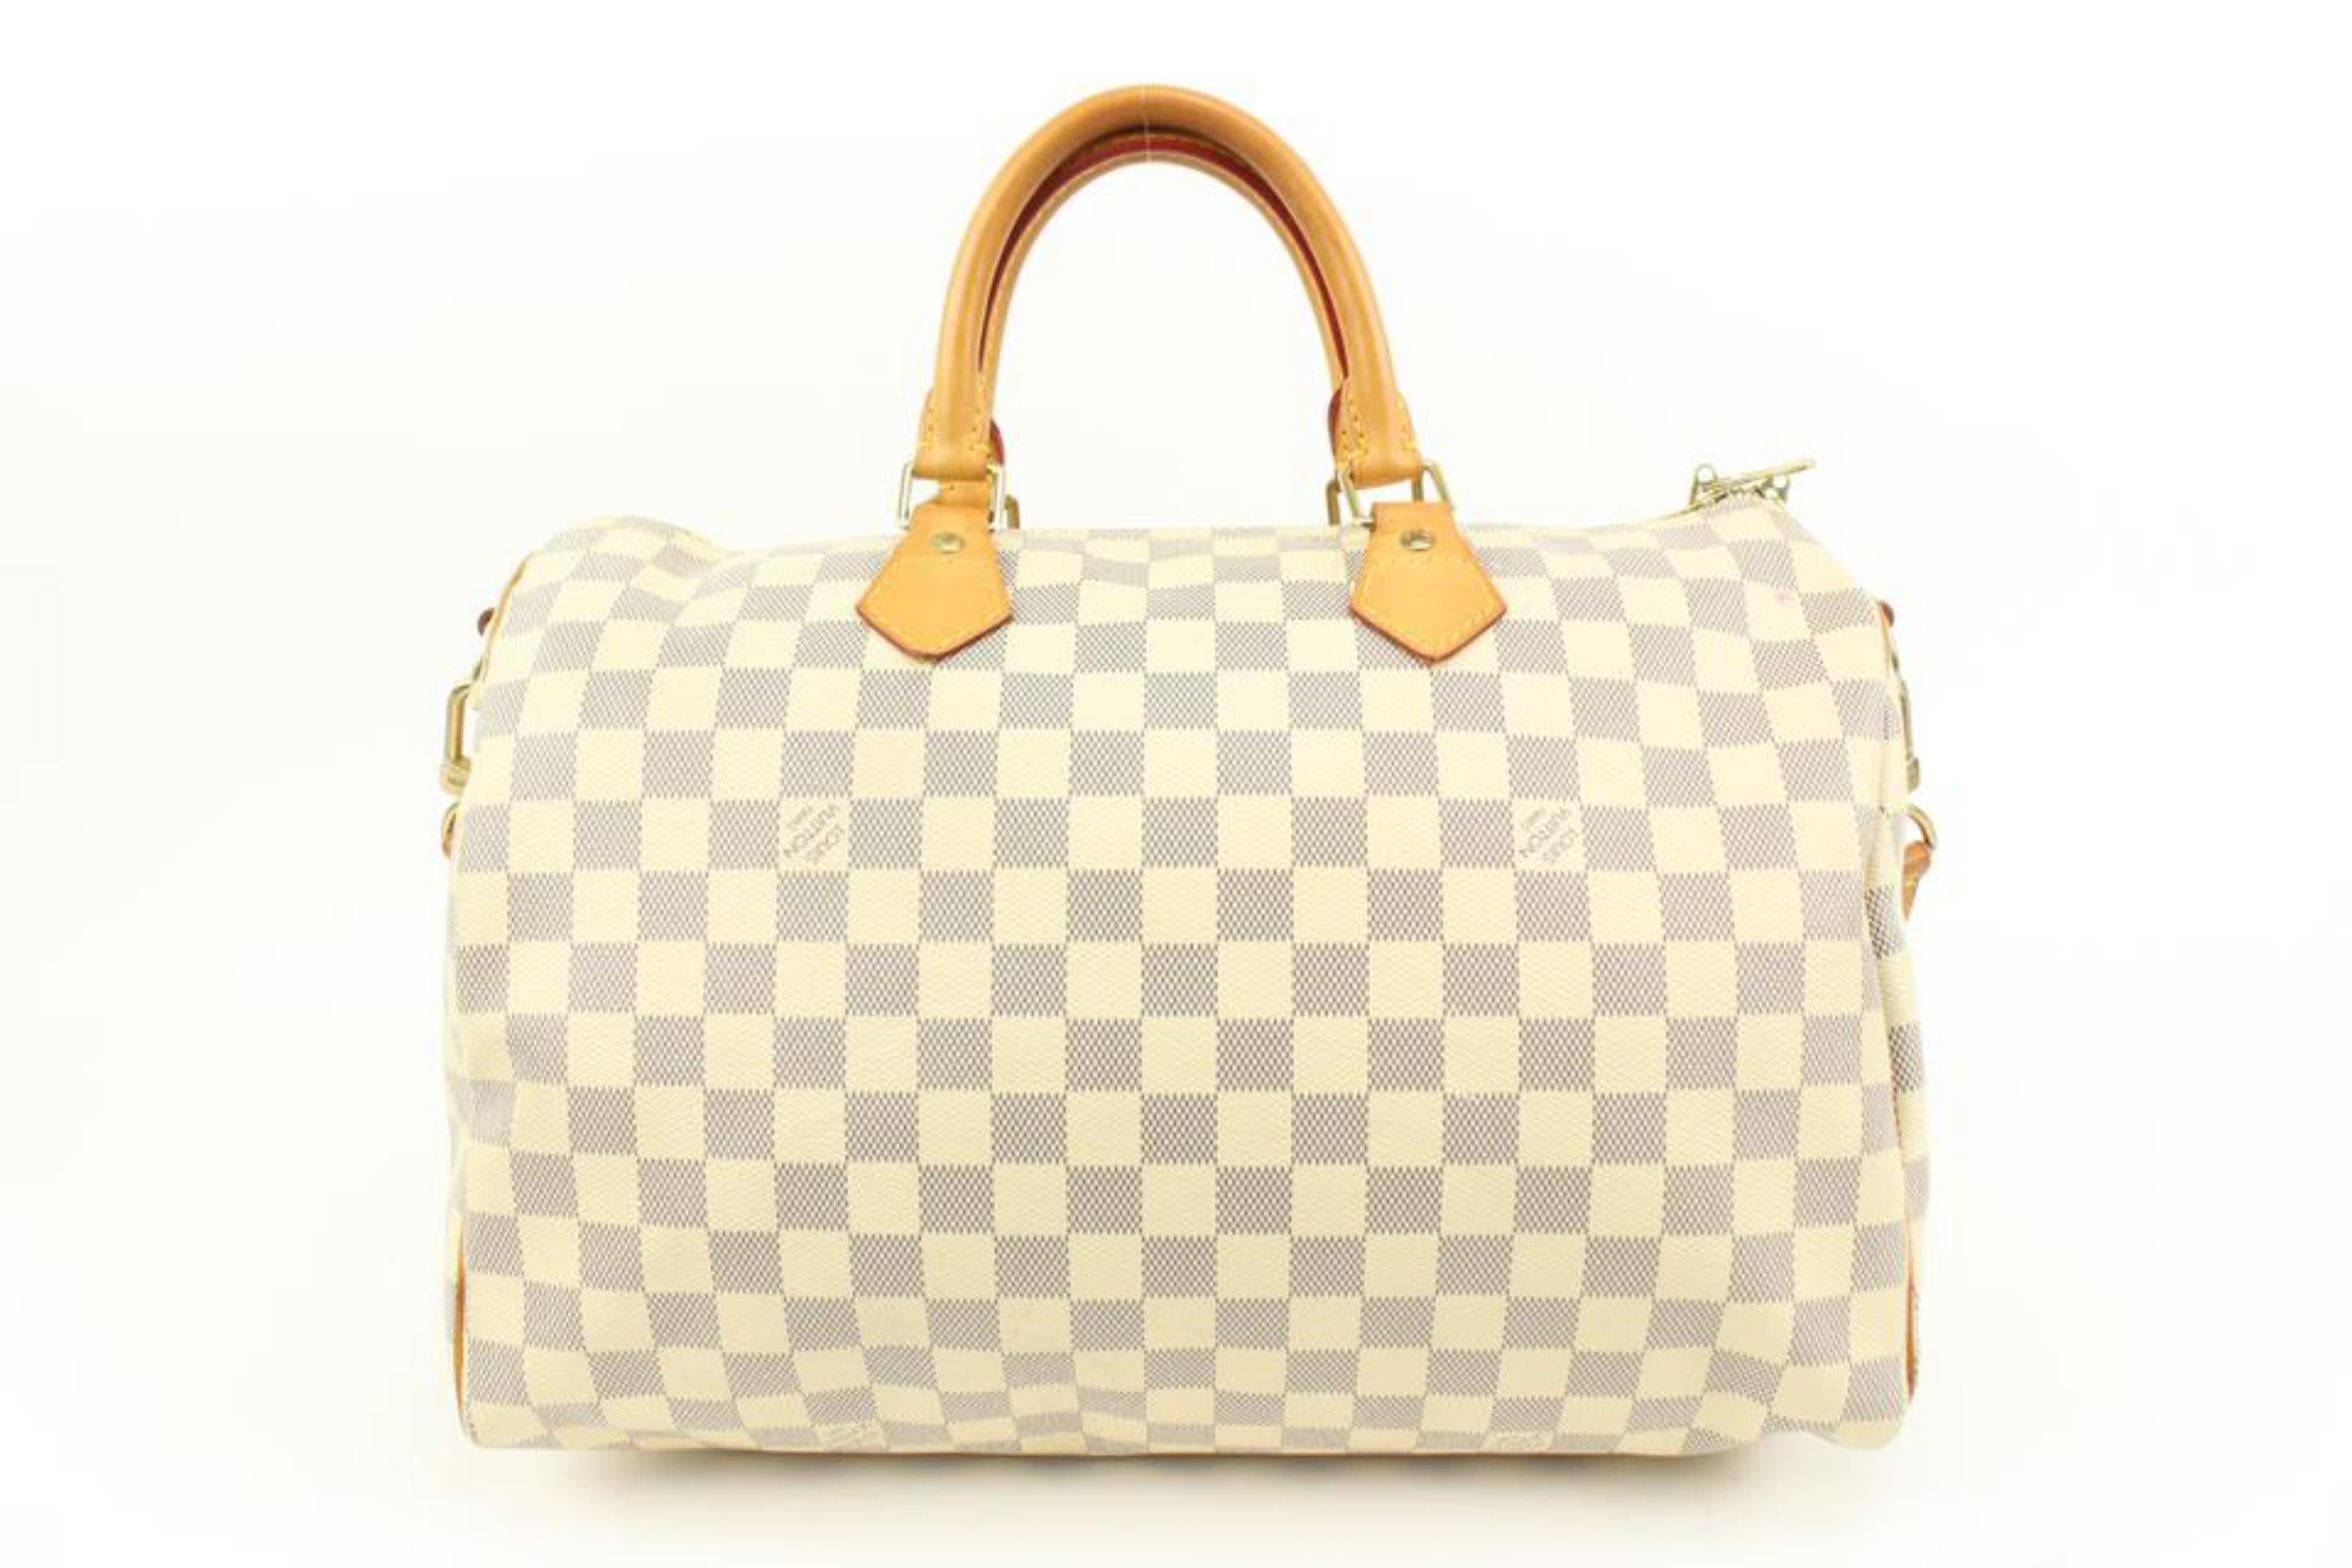 Louis Vuitton Damier Azur Speedy Bandouliere 35 Boston with Strap 10lk323s In Good Condition For Sale In Dix hills, NY